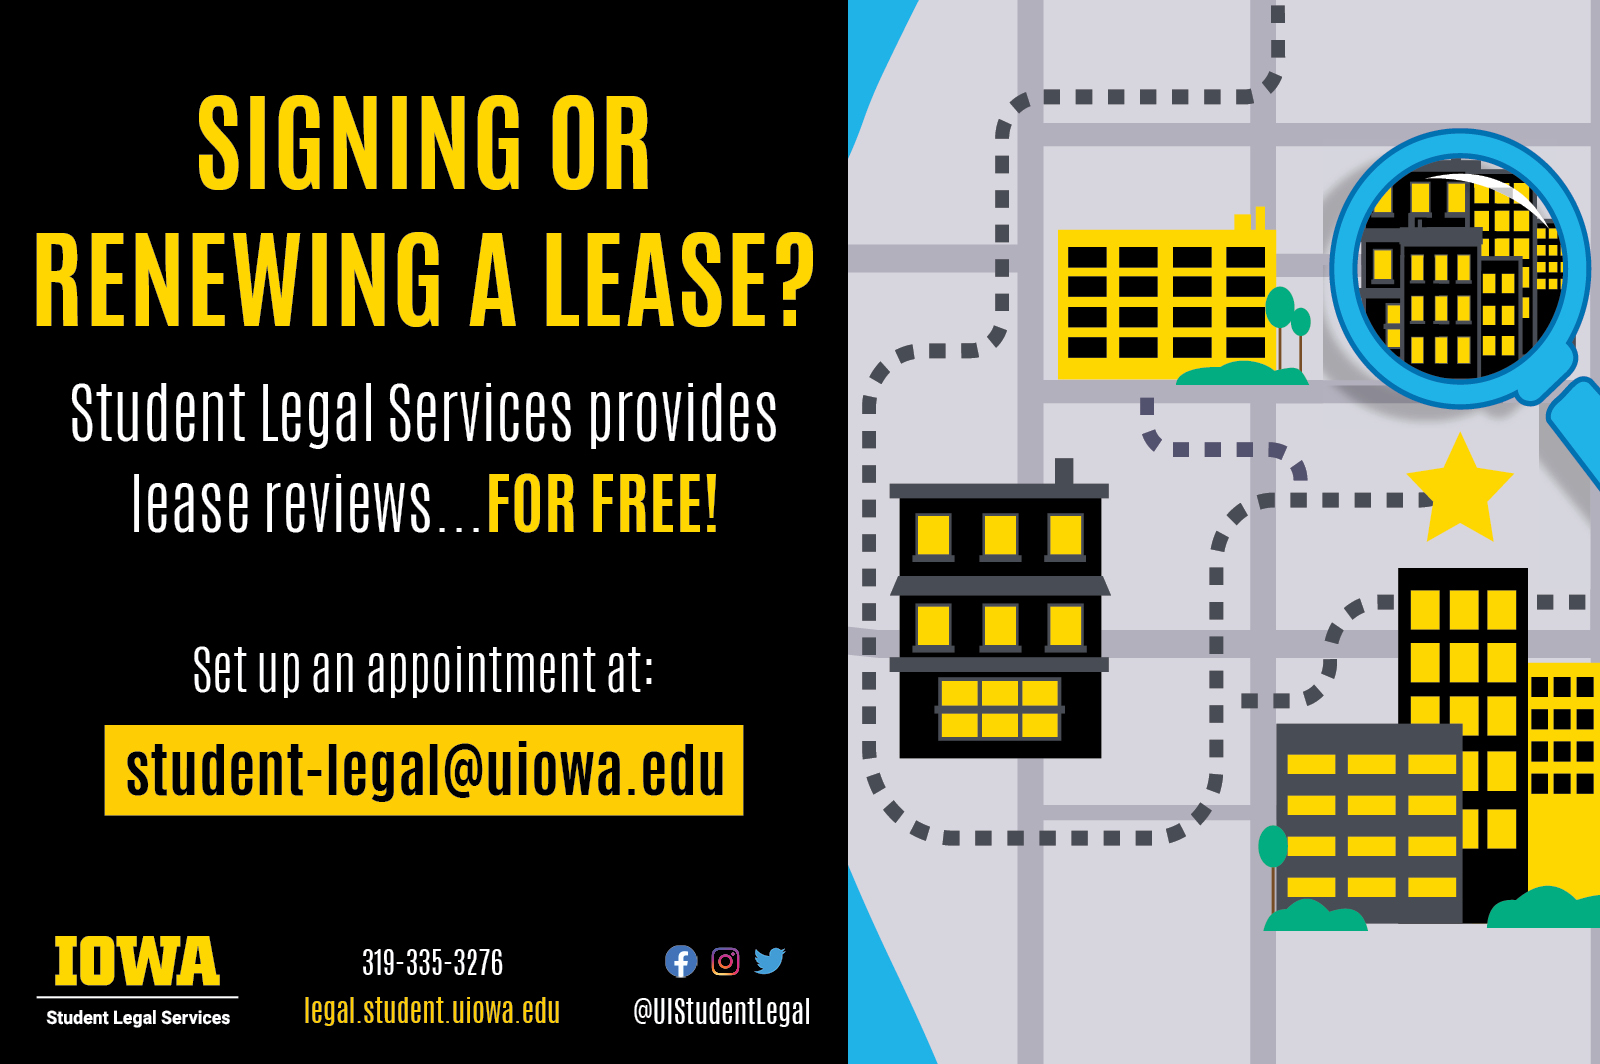 Signing or Renewing a lease? student legal services provides lease reviews FOR FREE!